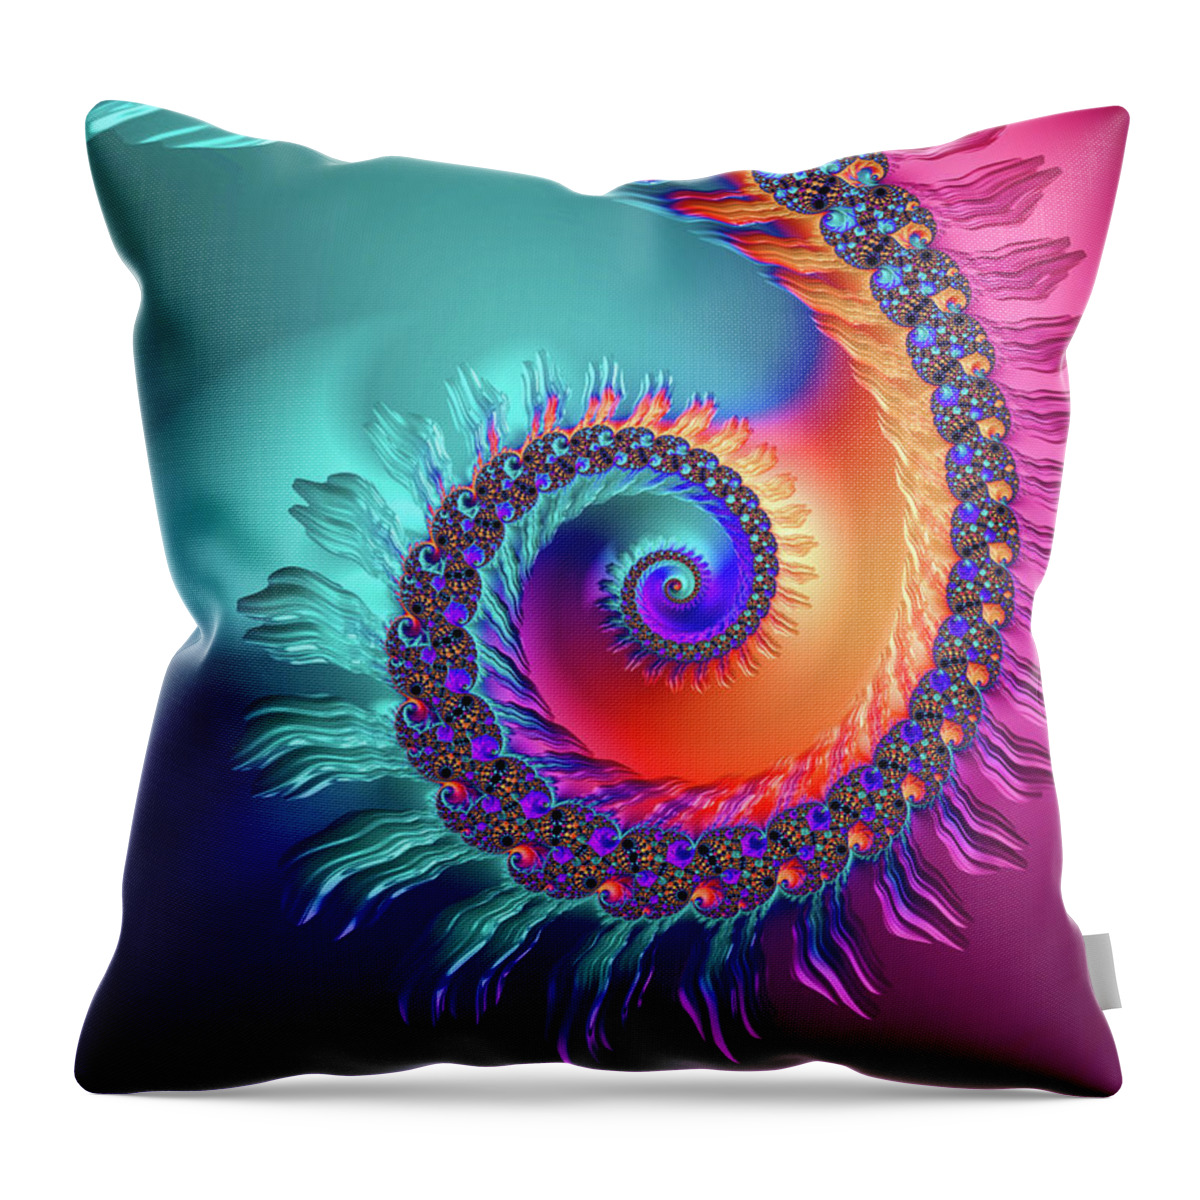 Spiral Throw Pillow featuring the digital art Vibrant and colorful fractal spiral by Matthias Hauser